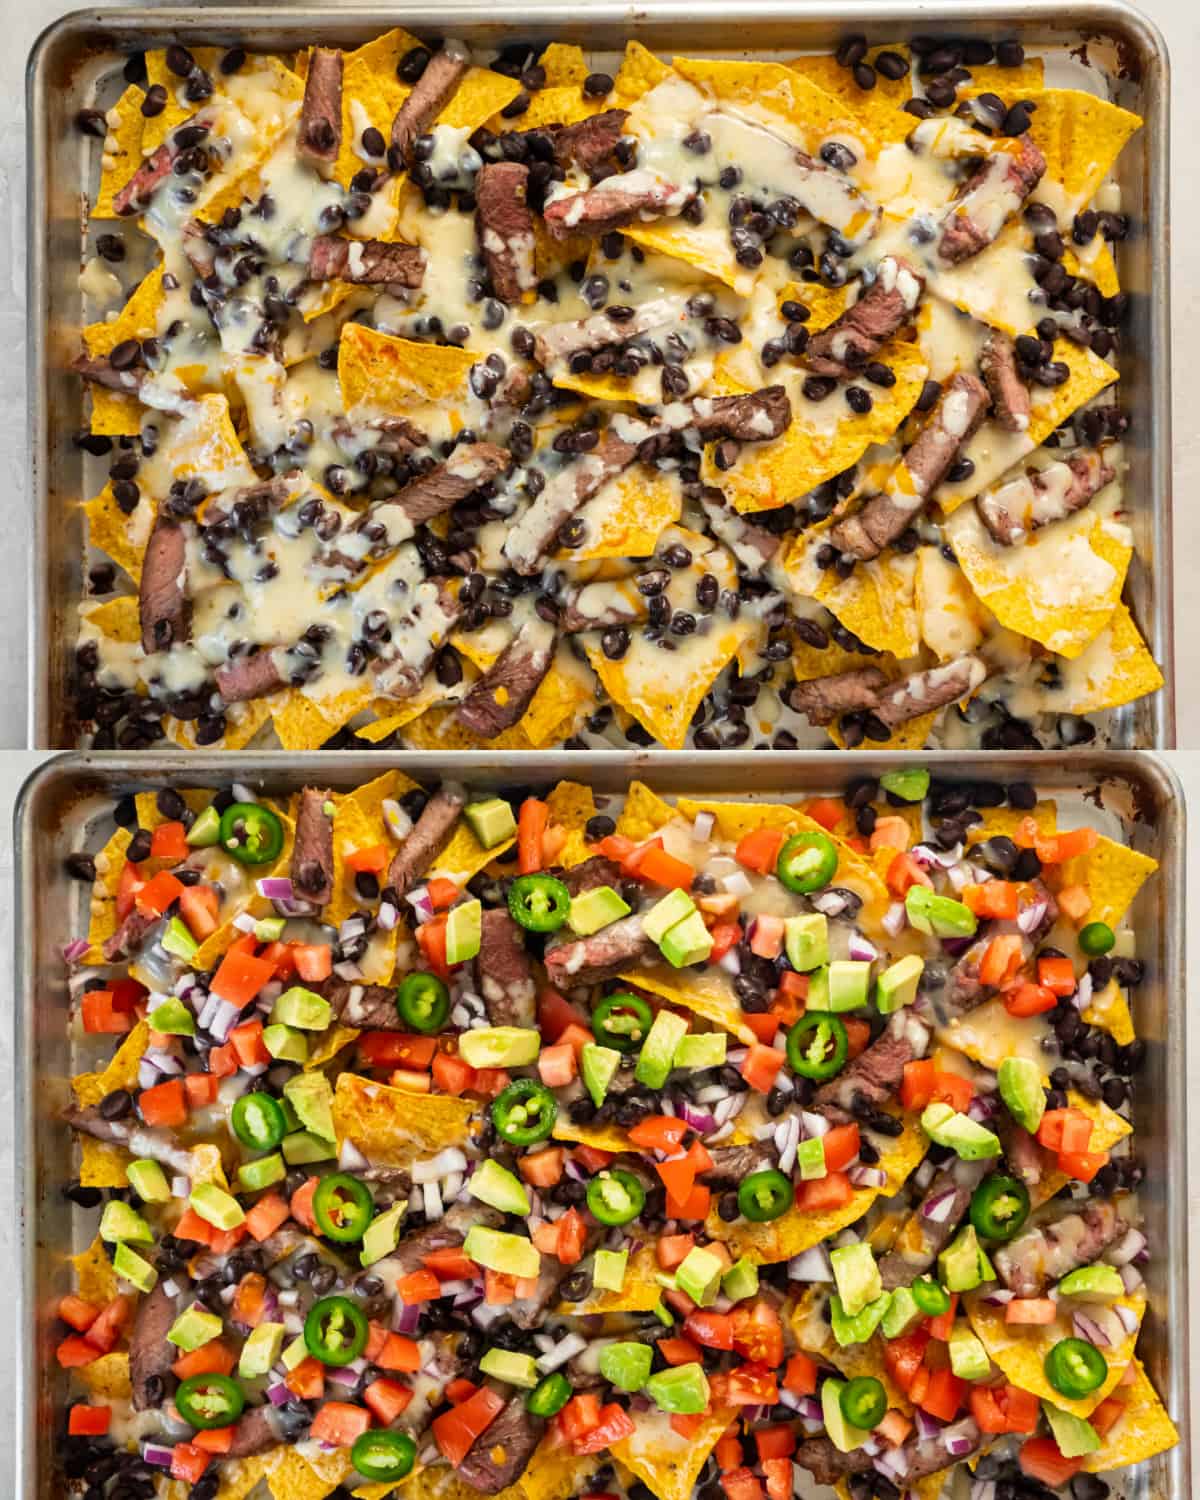 Layering the tortilla chips on a sheet pan with melted cheese, black beans and other ingredients on top.